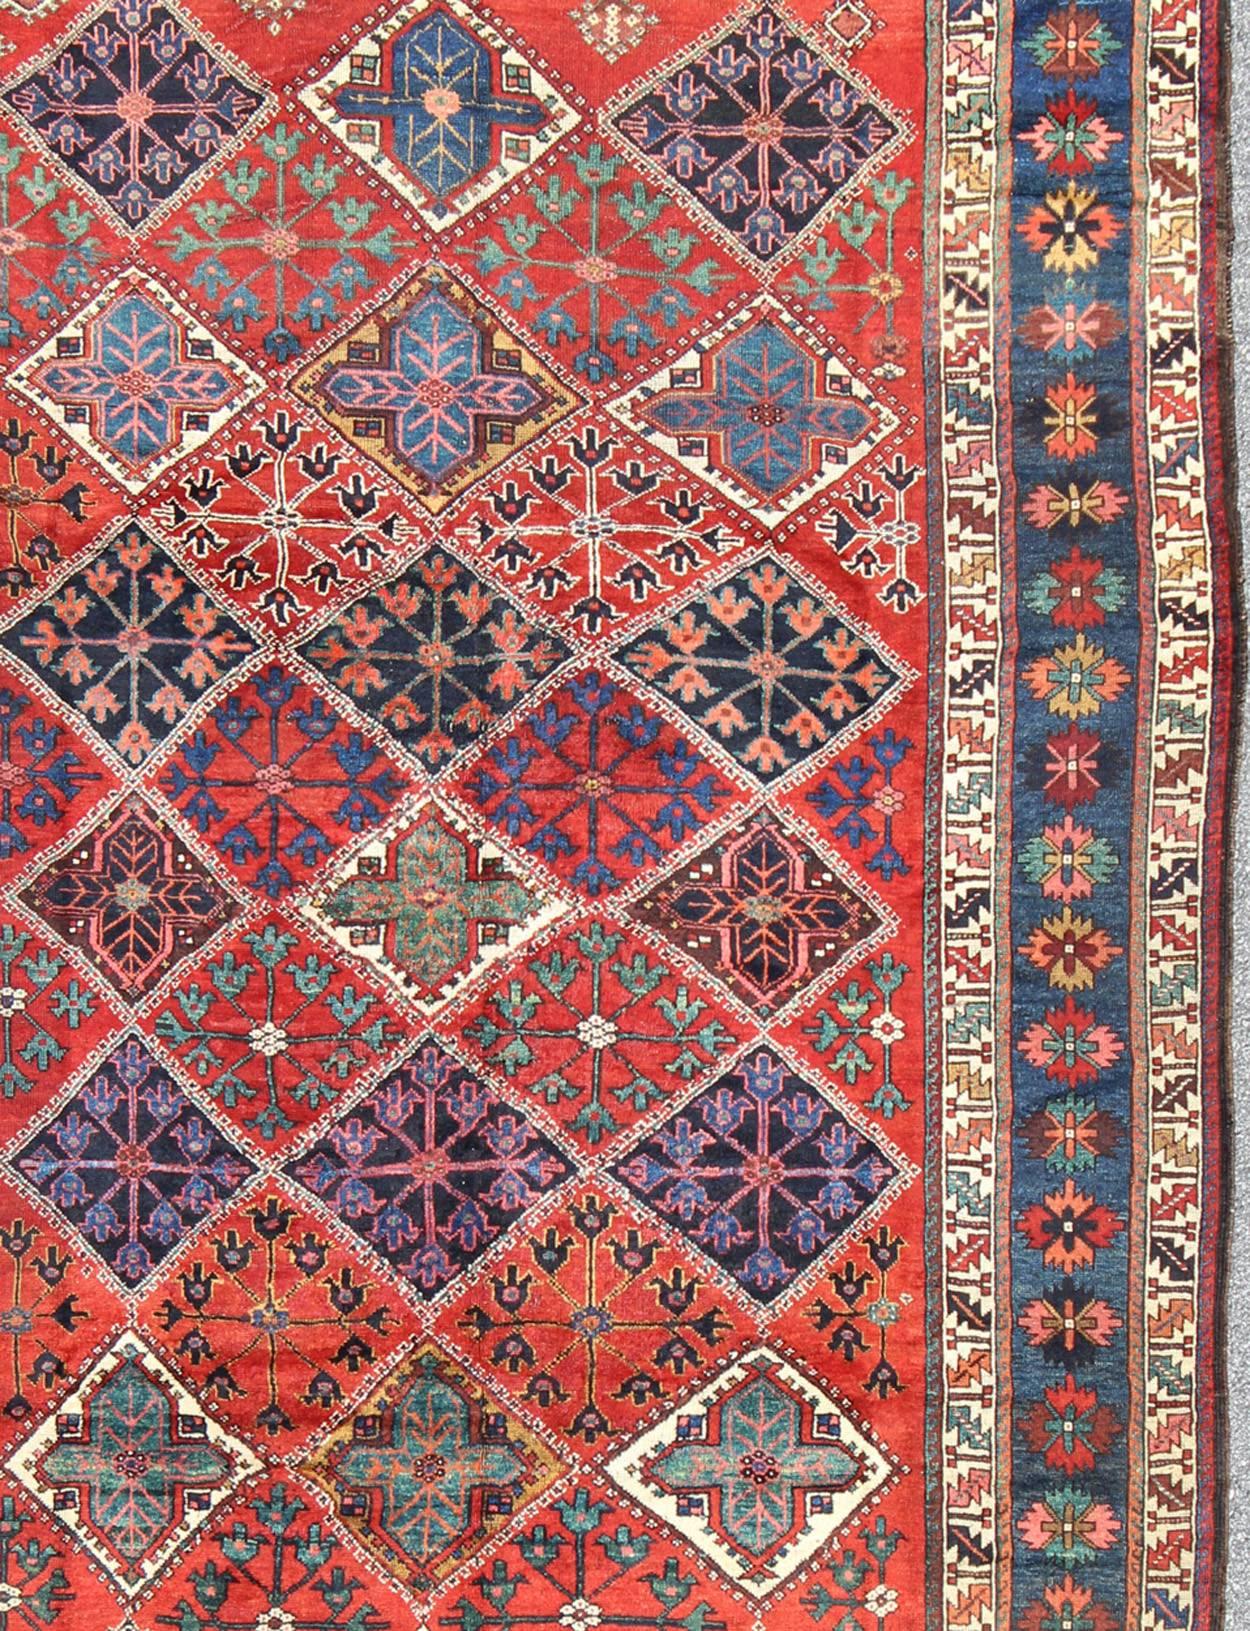 This amazing antique Persian Qashqai rug originates from the tribes of southwestern Iran and features a wonderful geometric pattern and traditional color palette. The variations of red, blue and ivory beautifully form the field and various